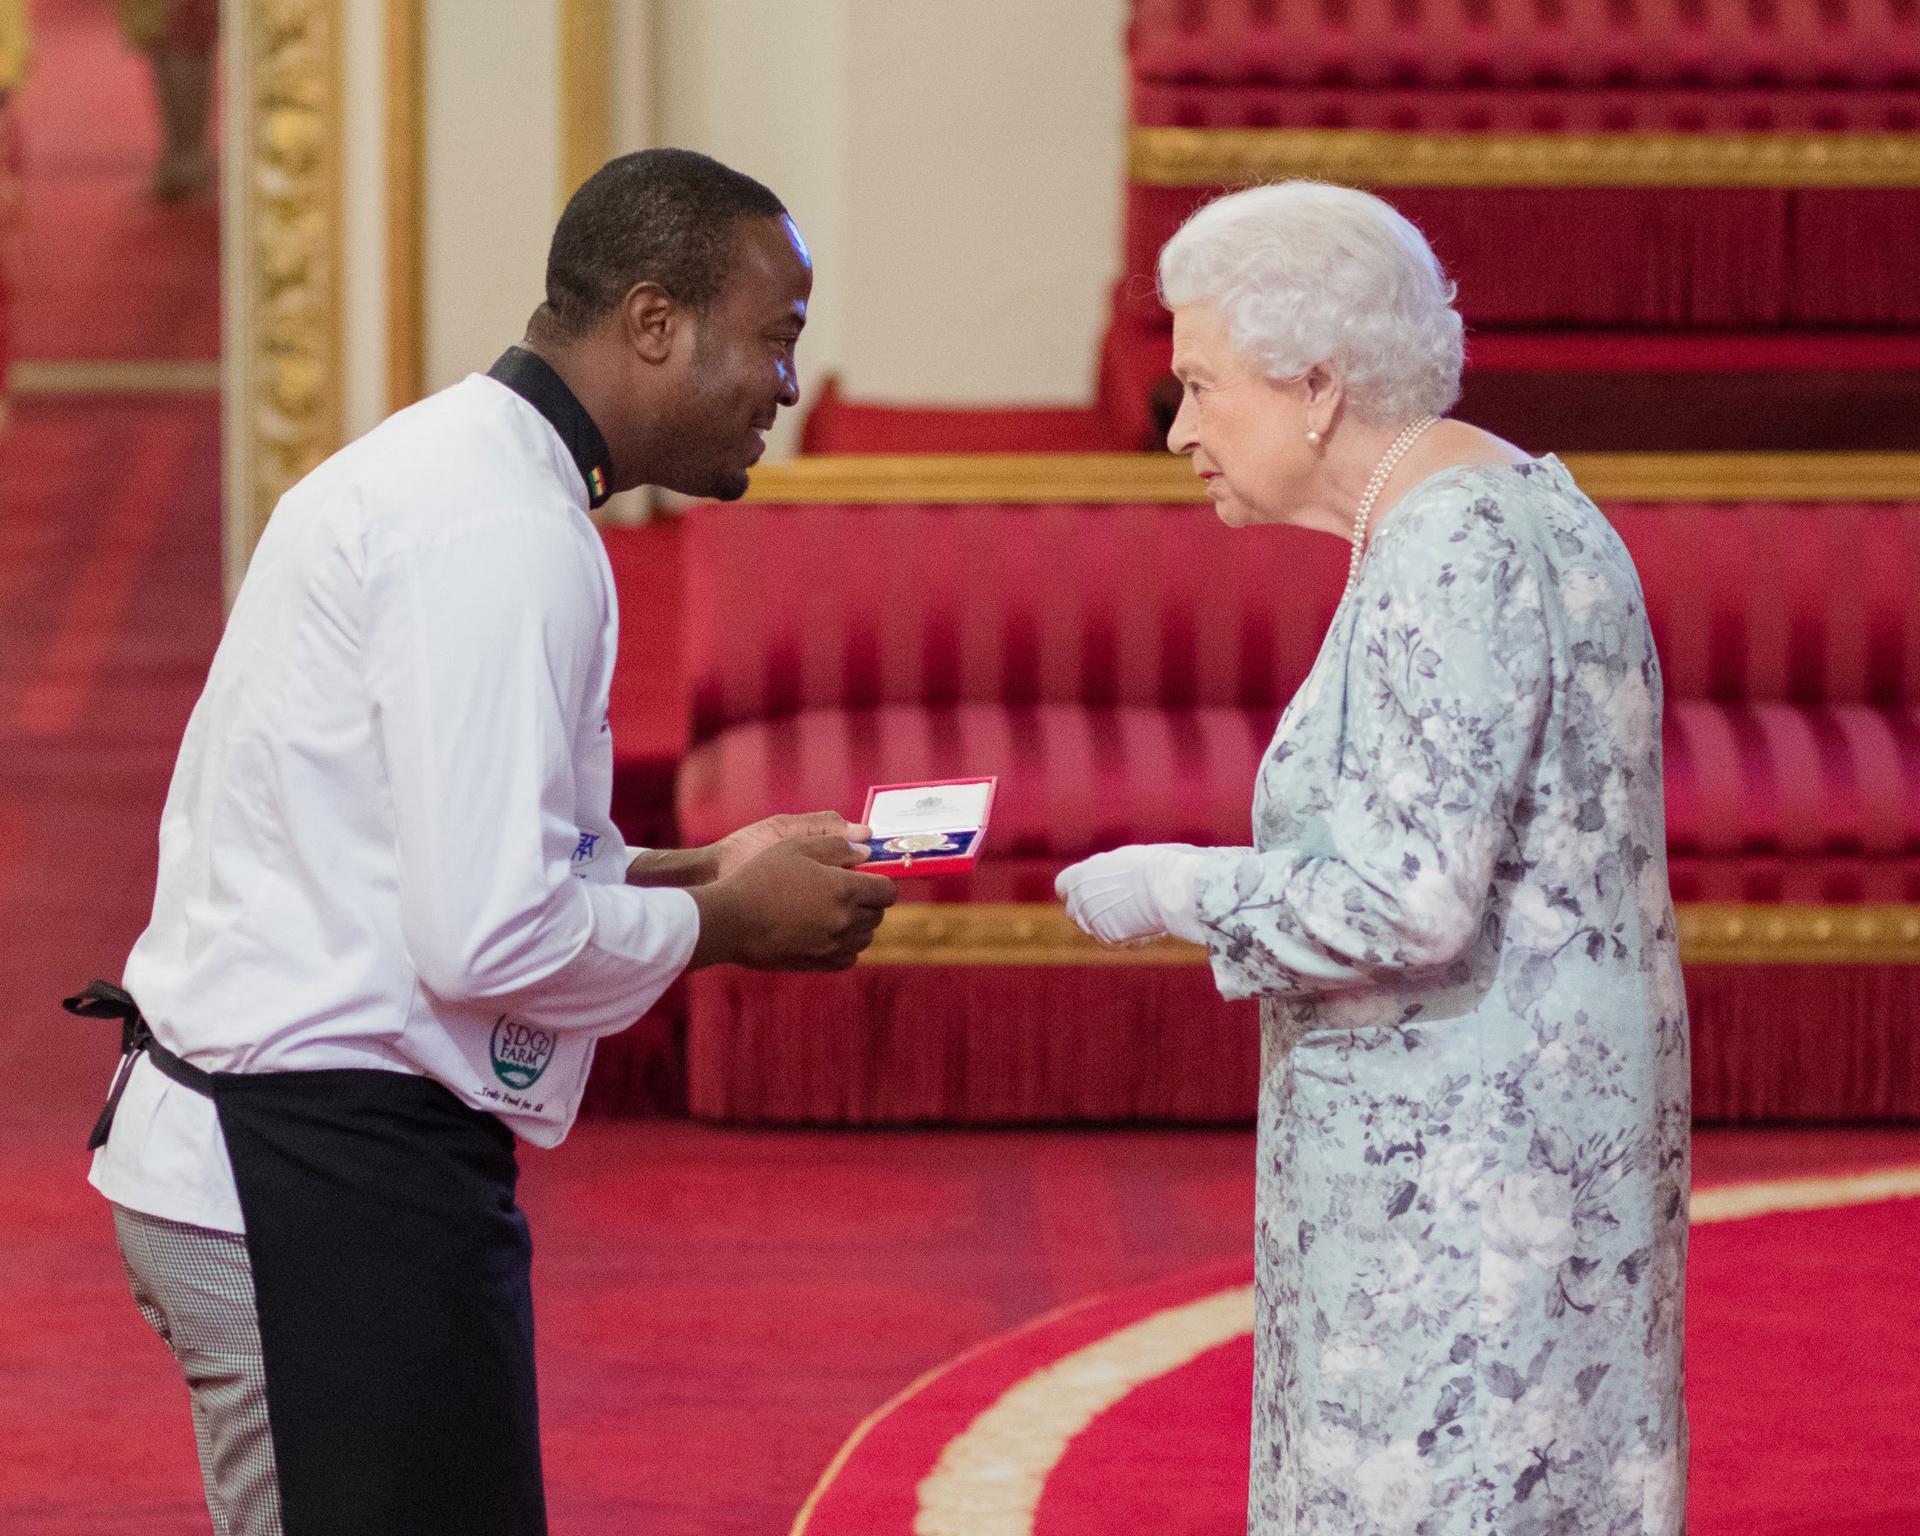 Chef Amoo Addo receives an award from the queen of England.